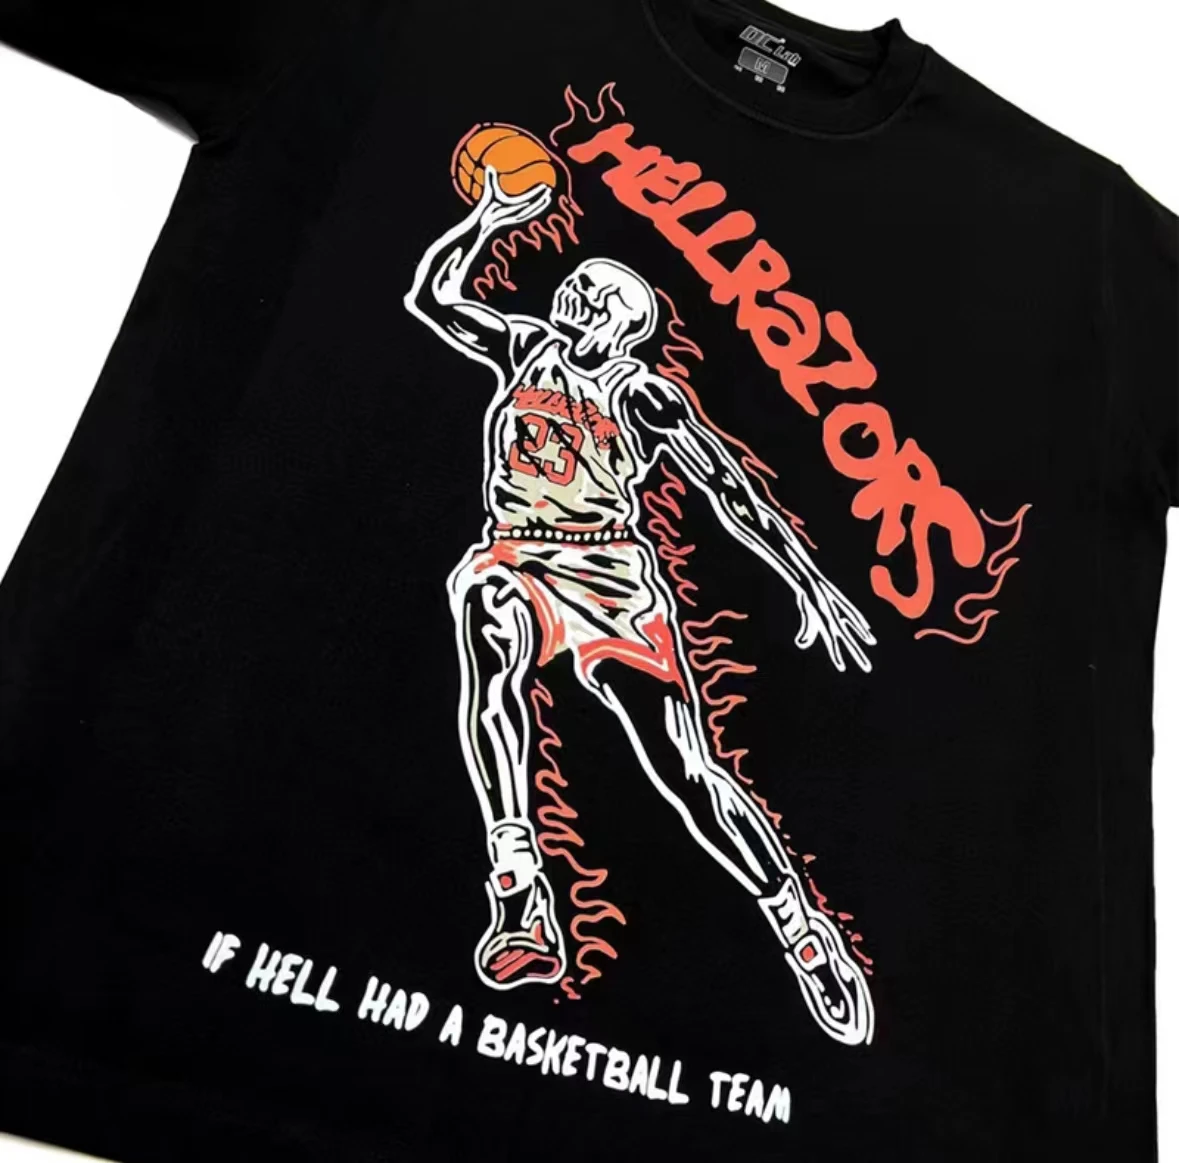 Vintage Style 90s Basketball Quotes Letter Spellout Tshirt